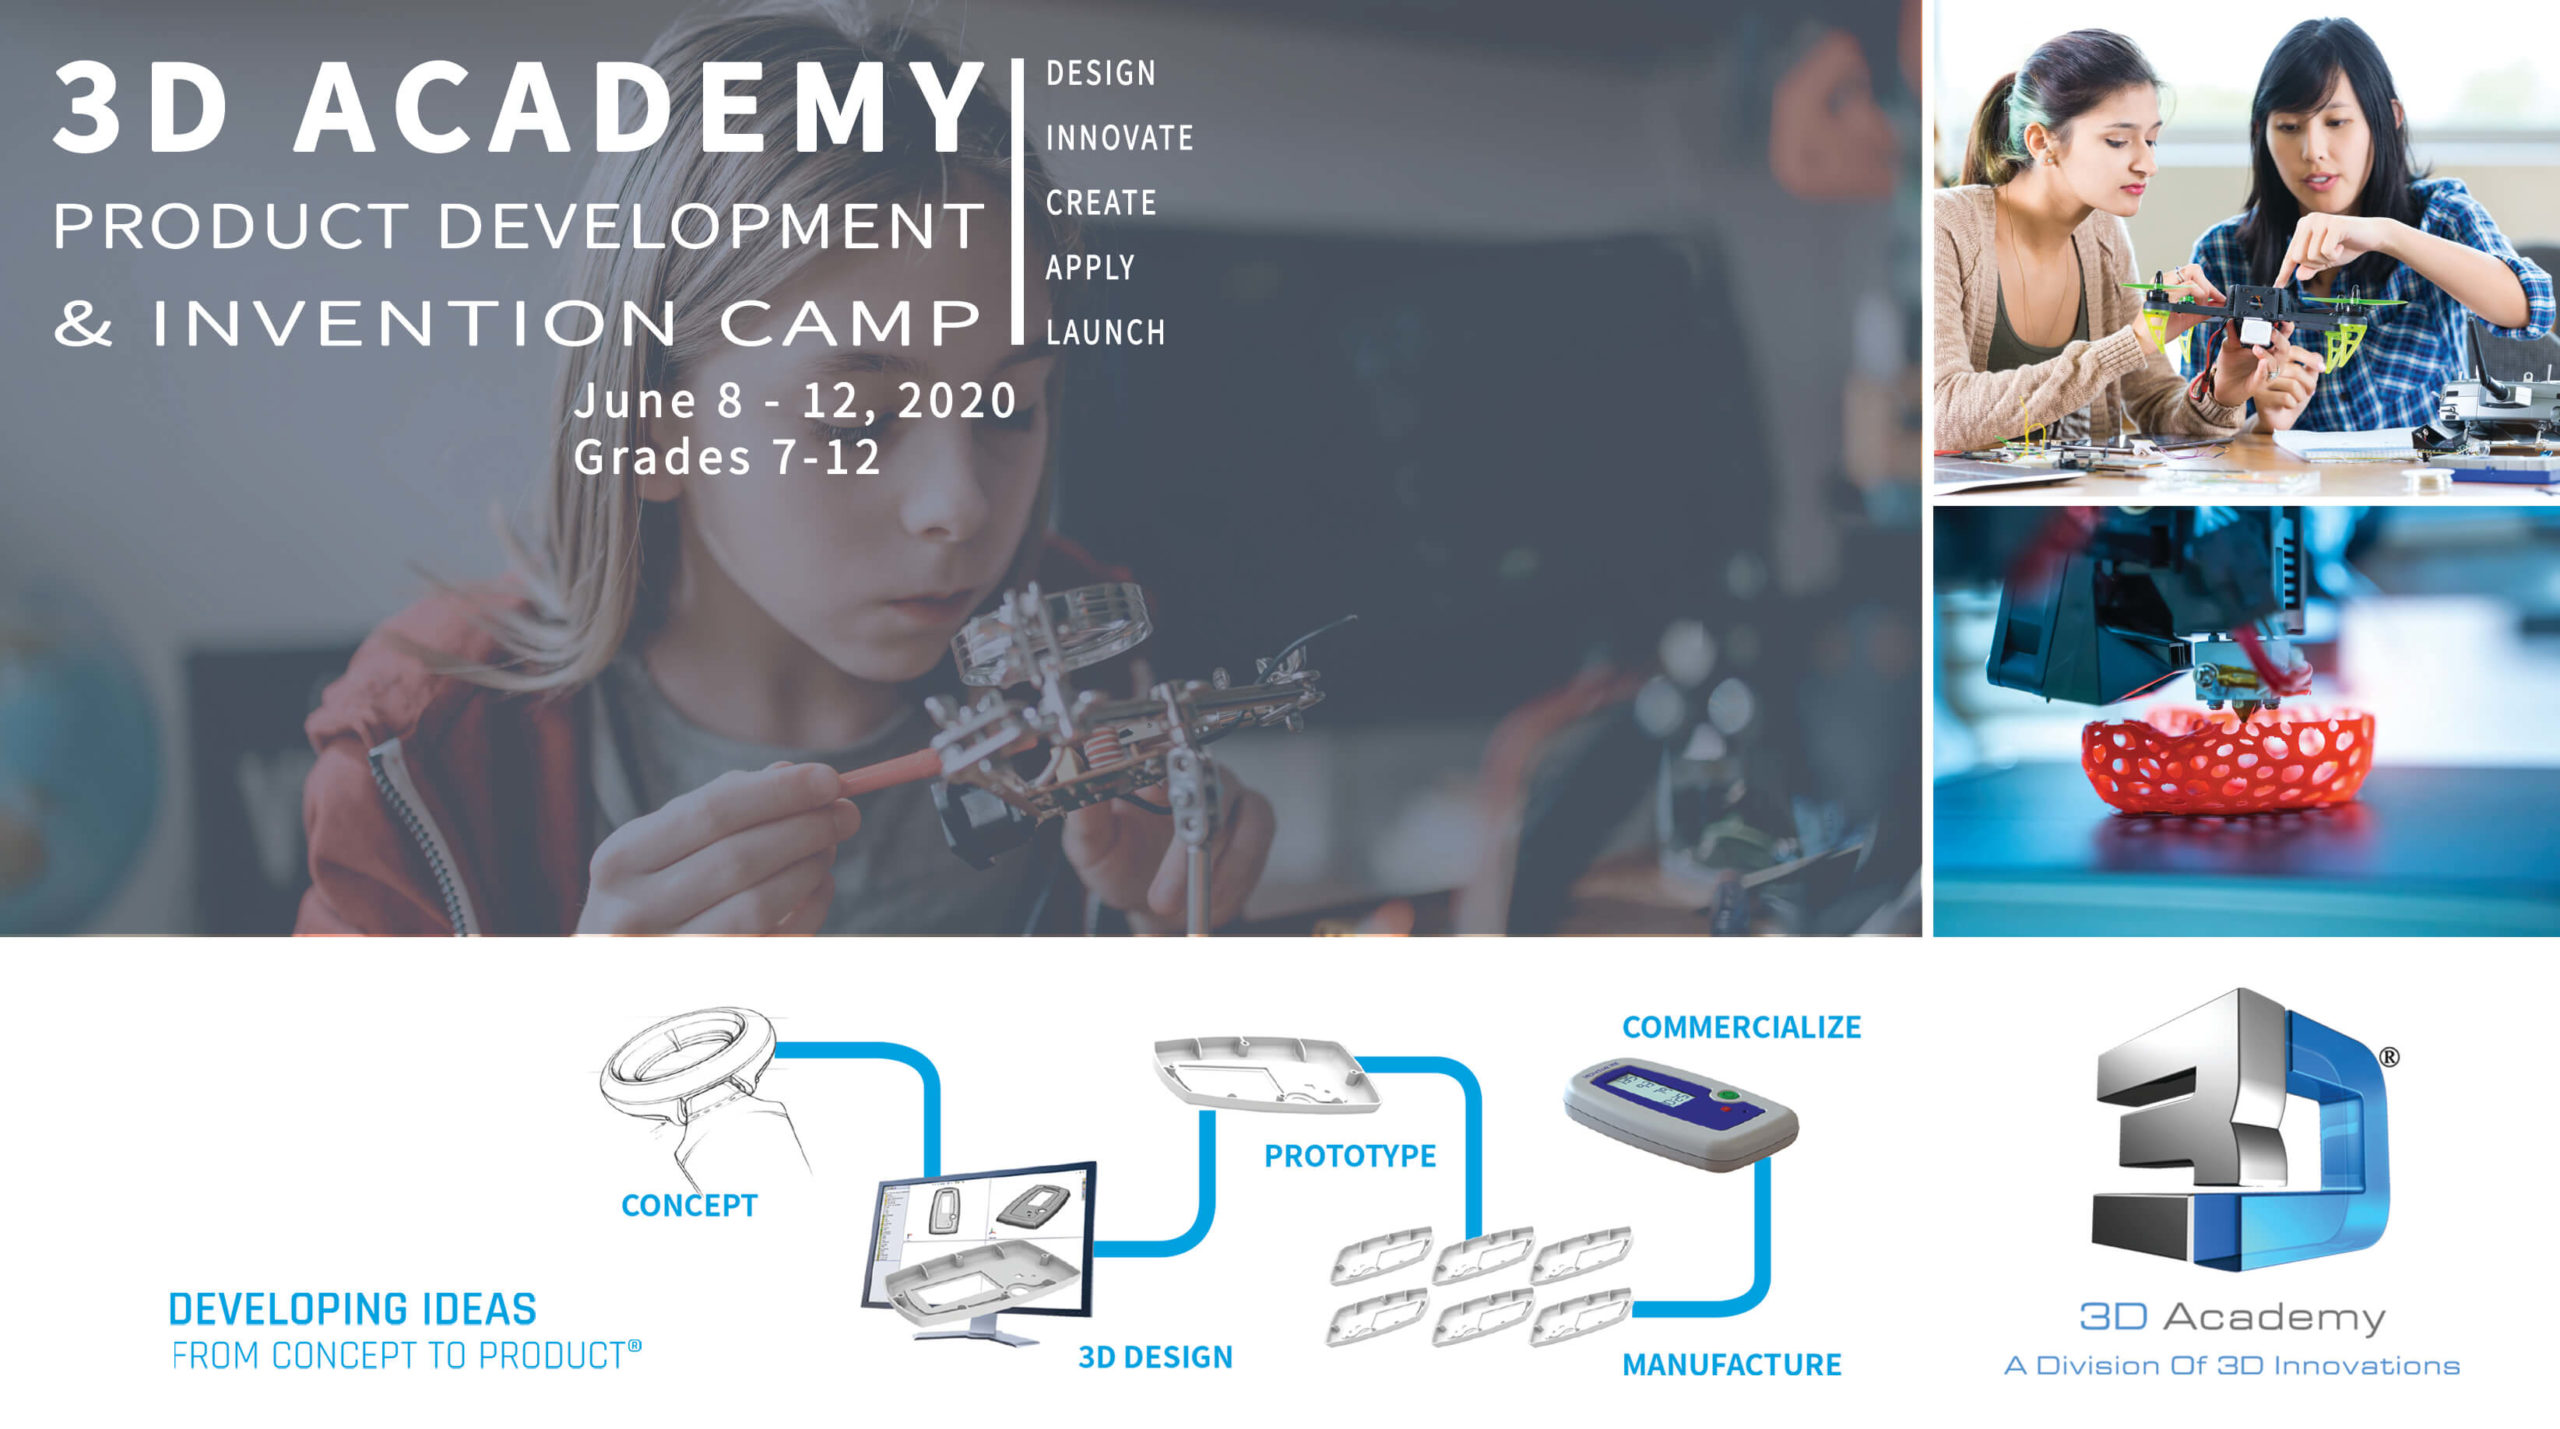 Register today for our 3D Academy Invention Camp summer camp.